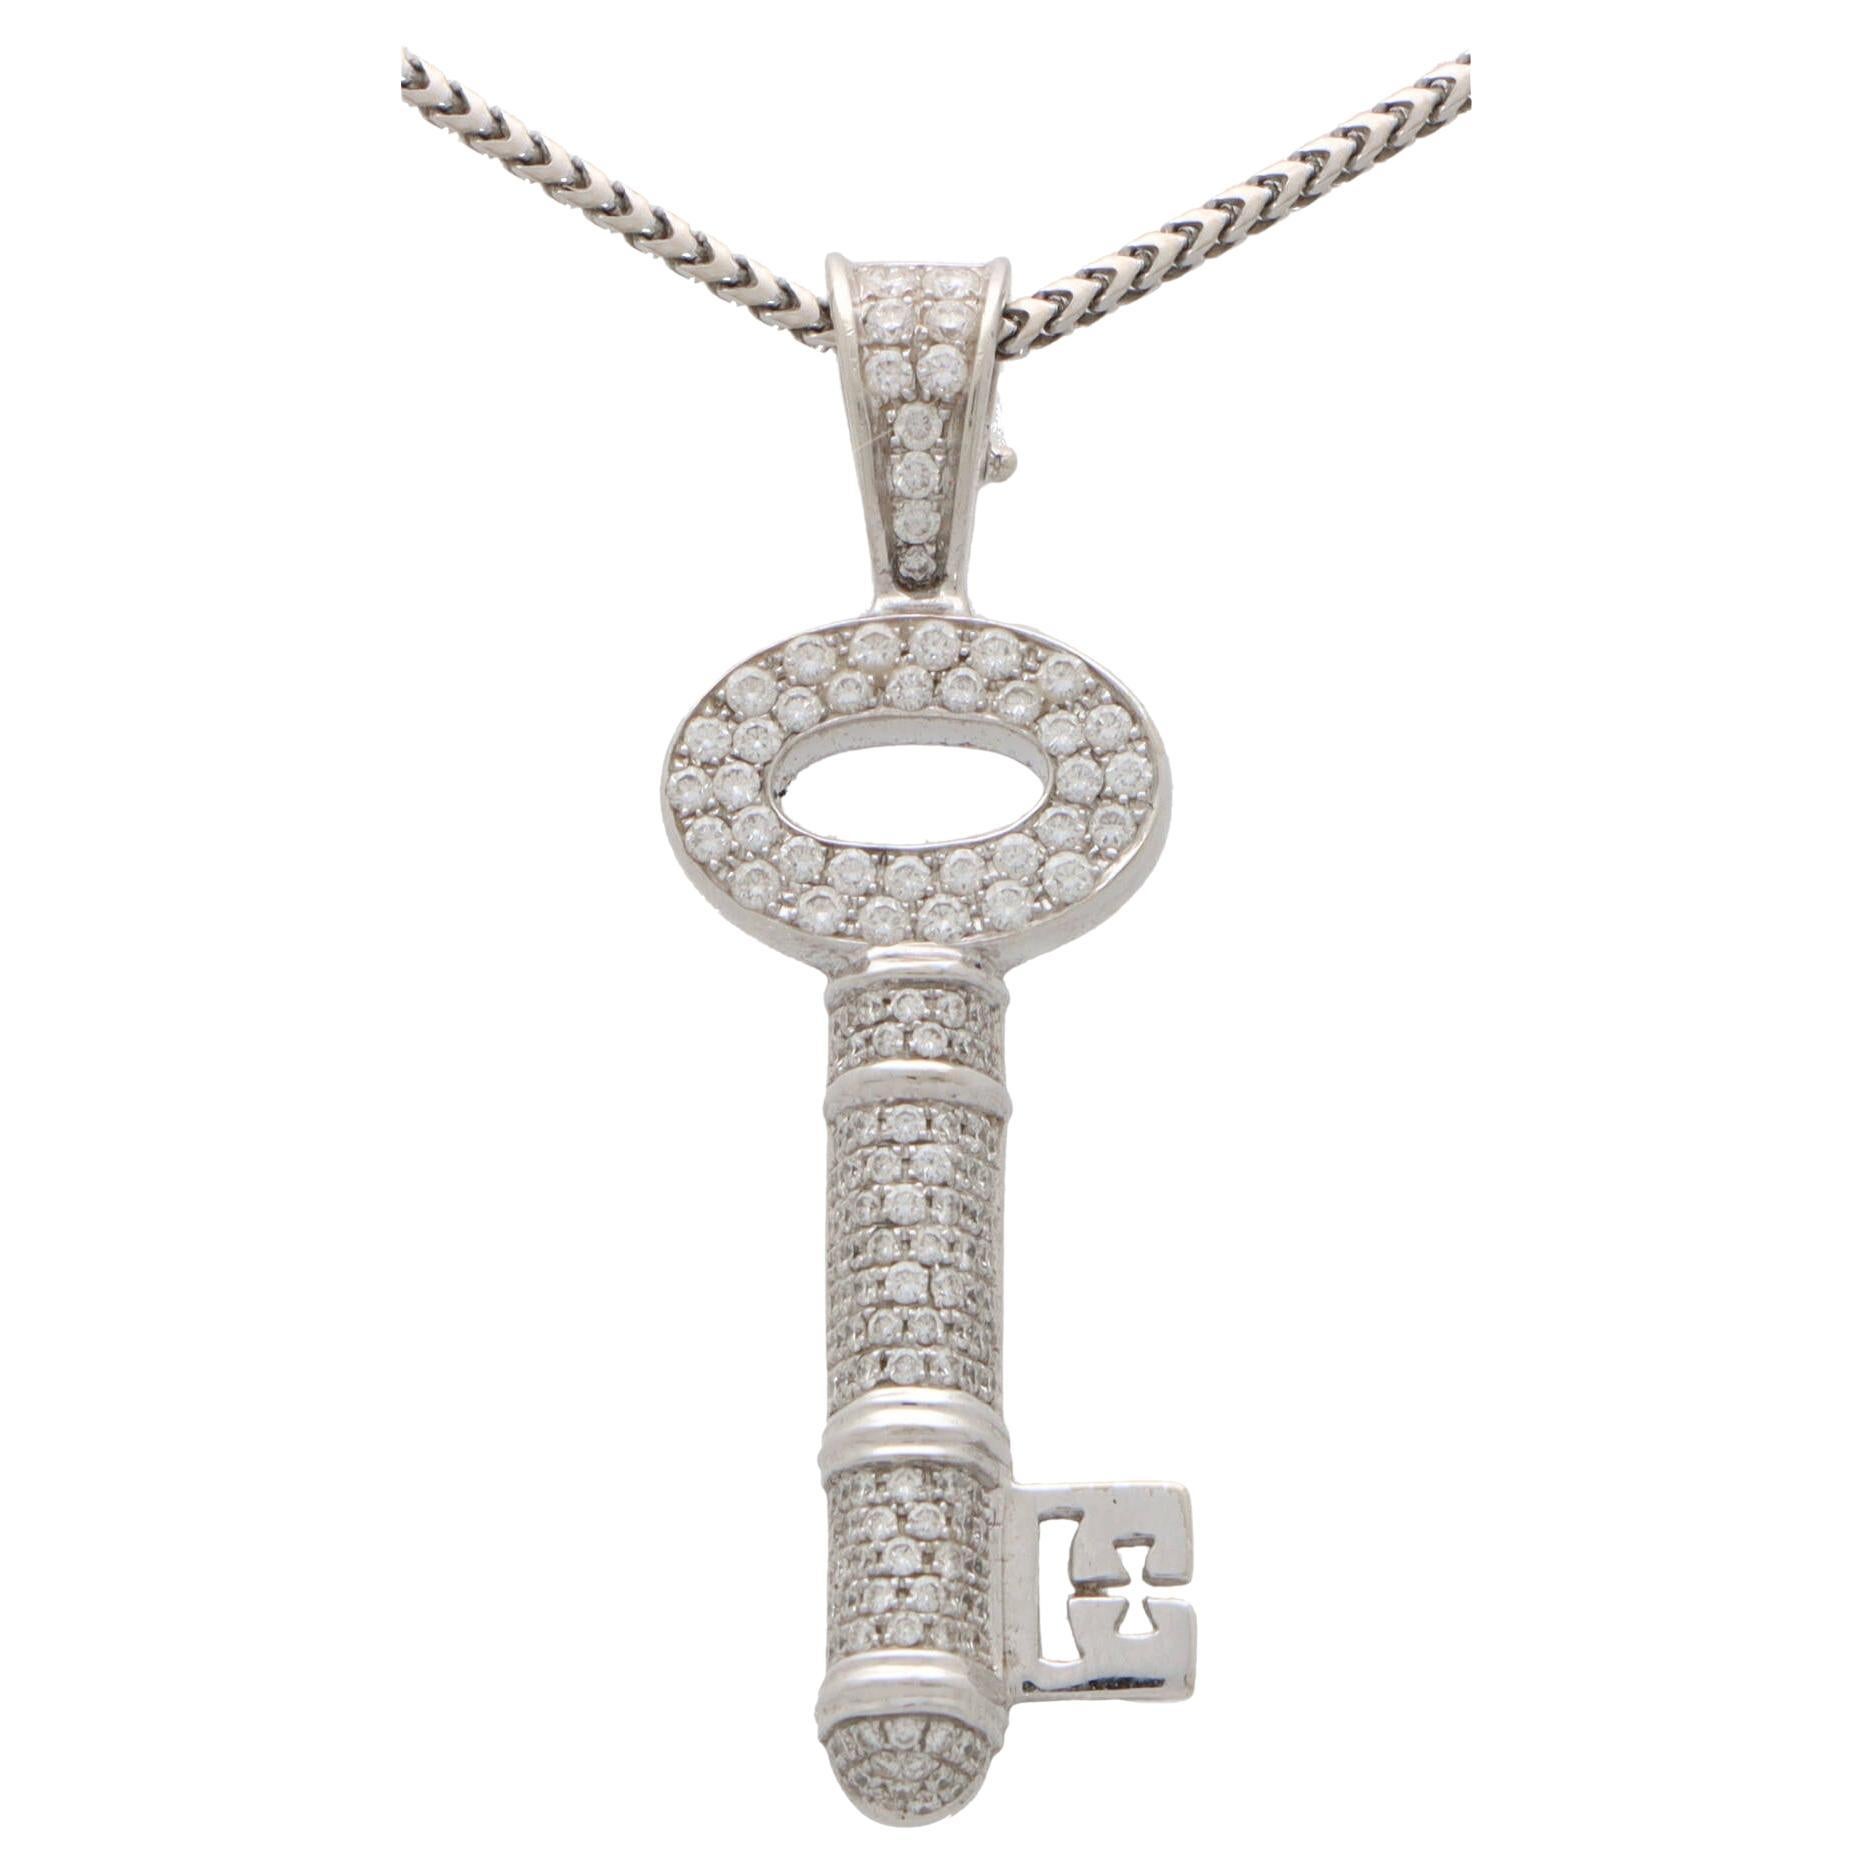  Vintage Theo Fennell Diamond Key Necklace Set in 18k White Gold For Sale